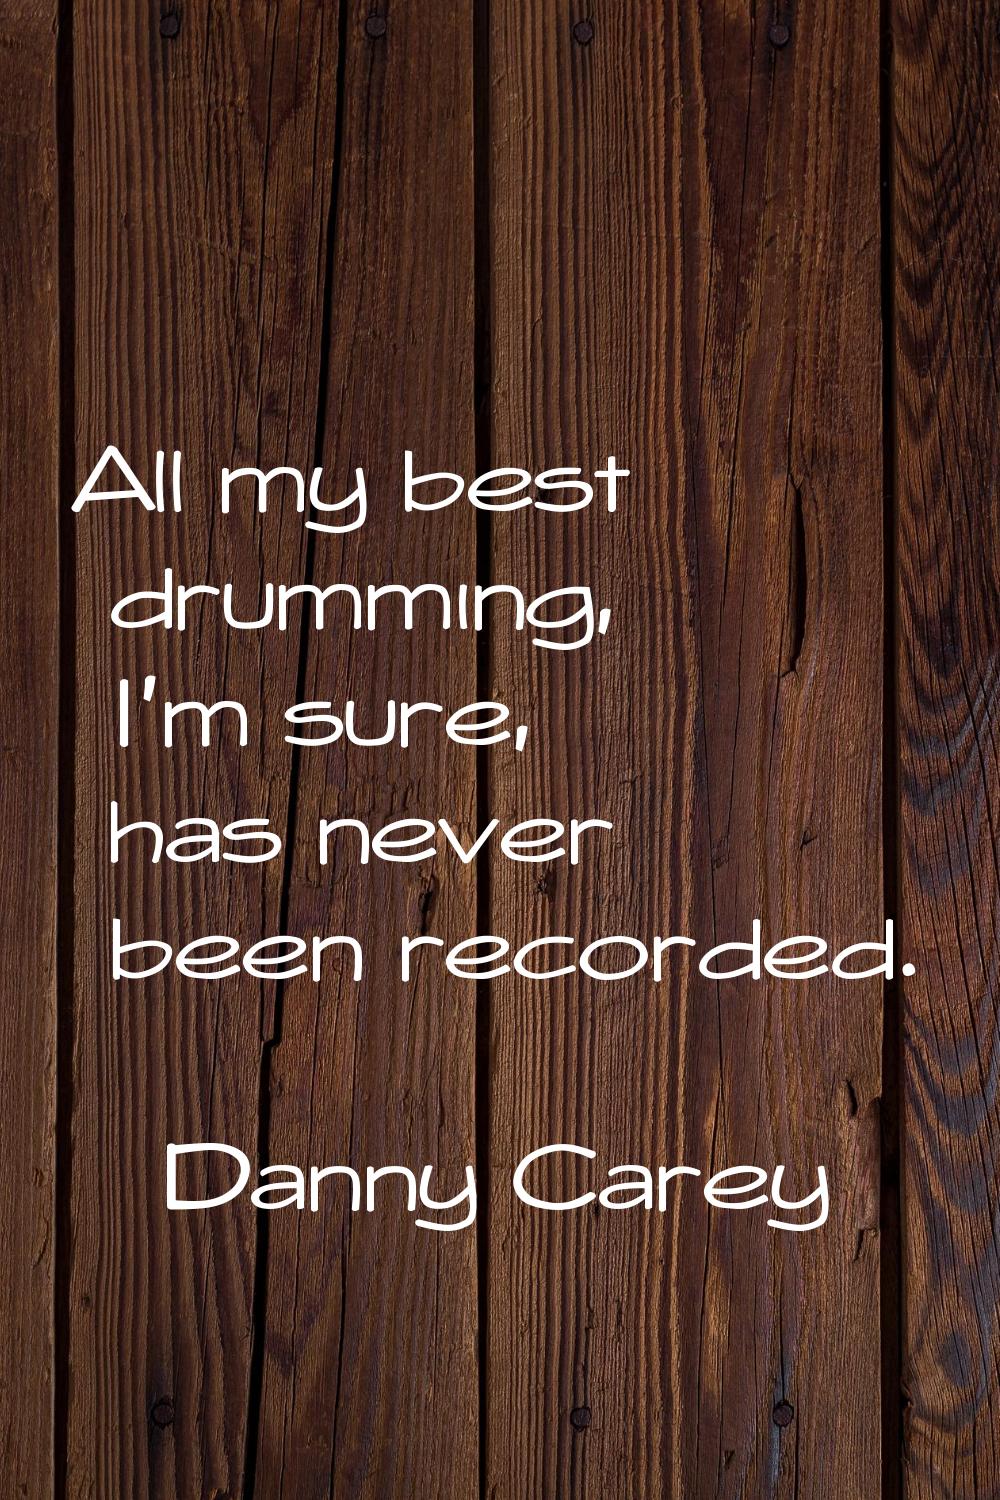 All my best drumming, I'm sure, has never been recorded.